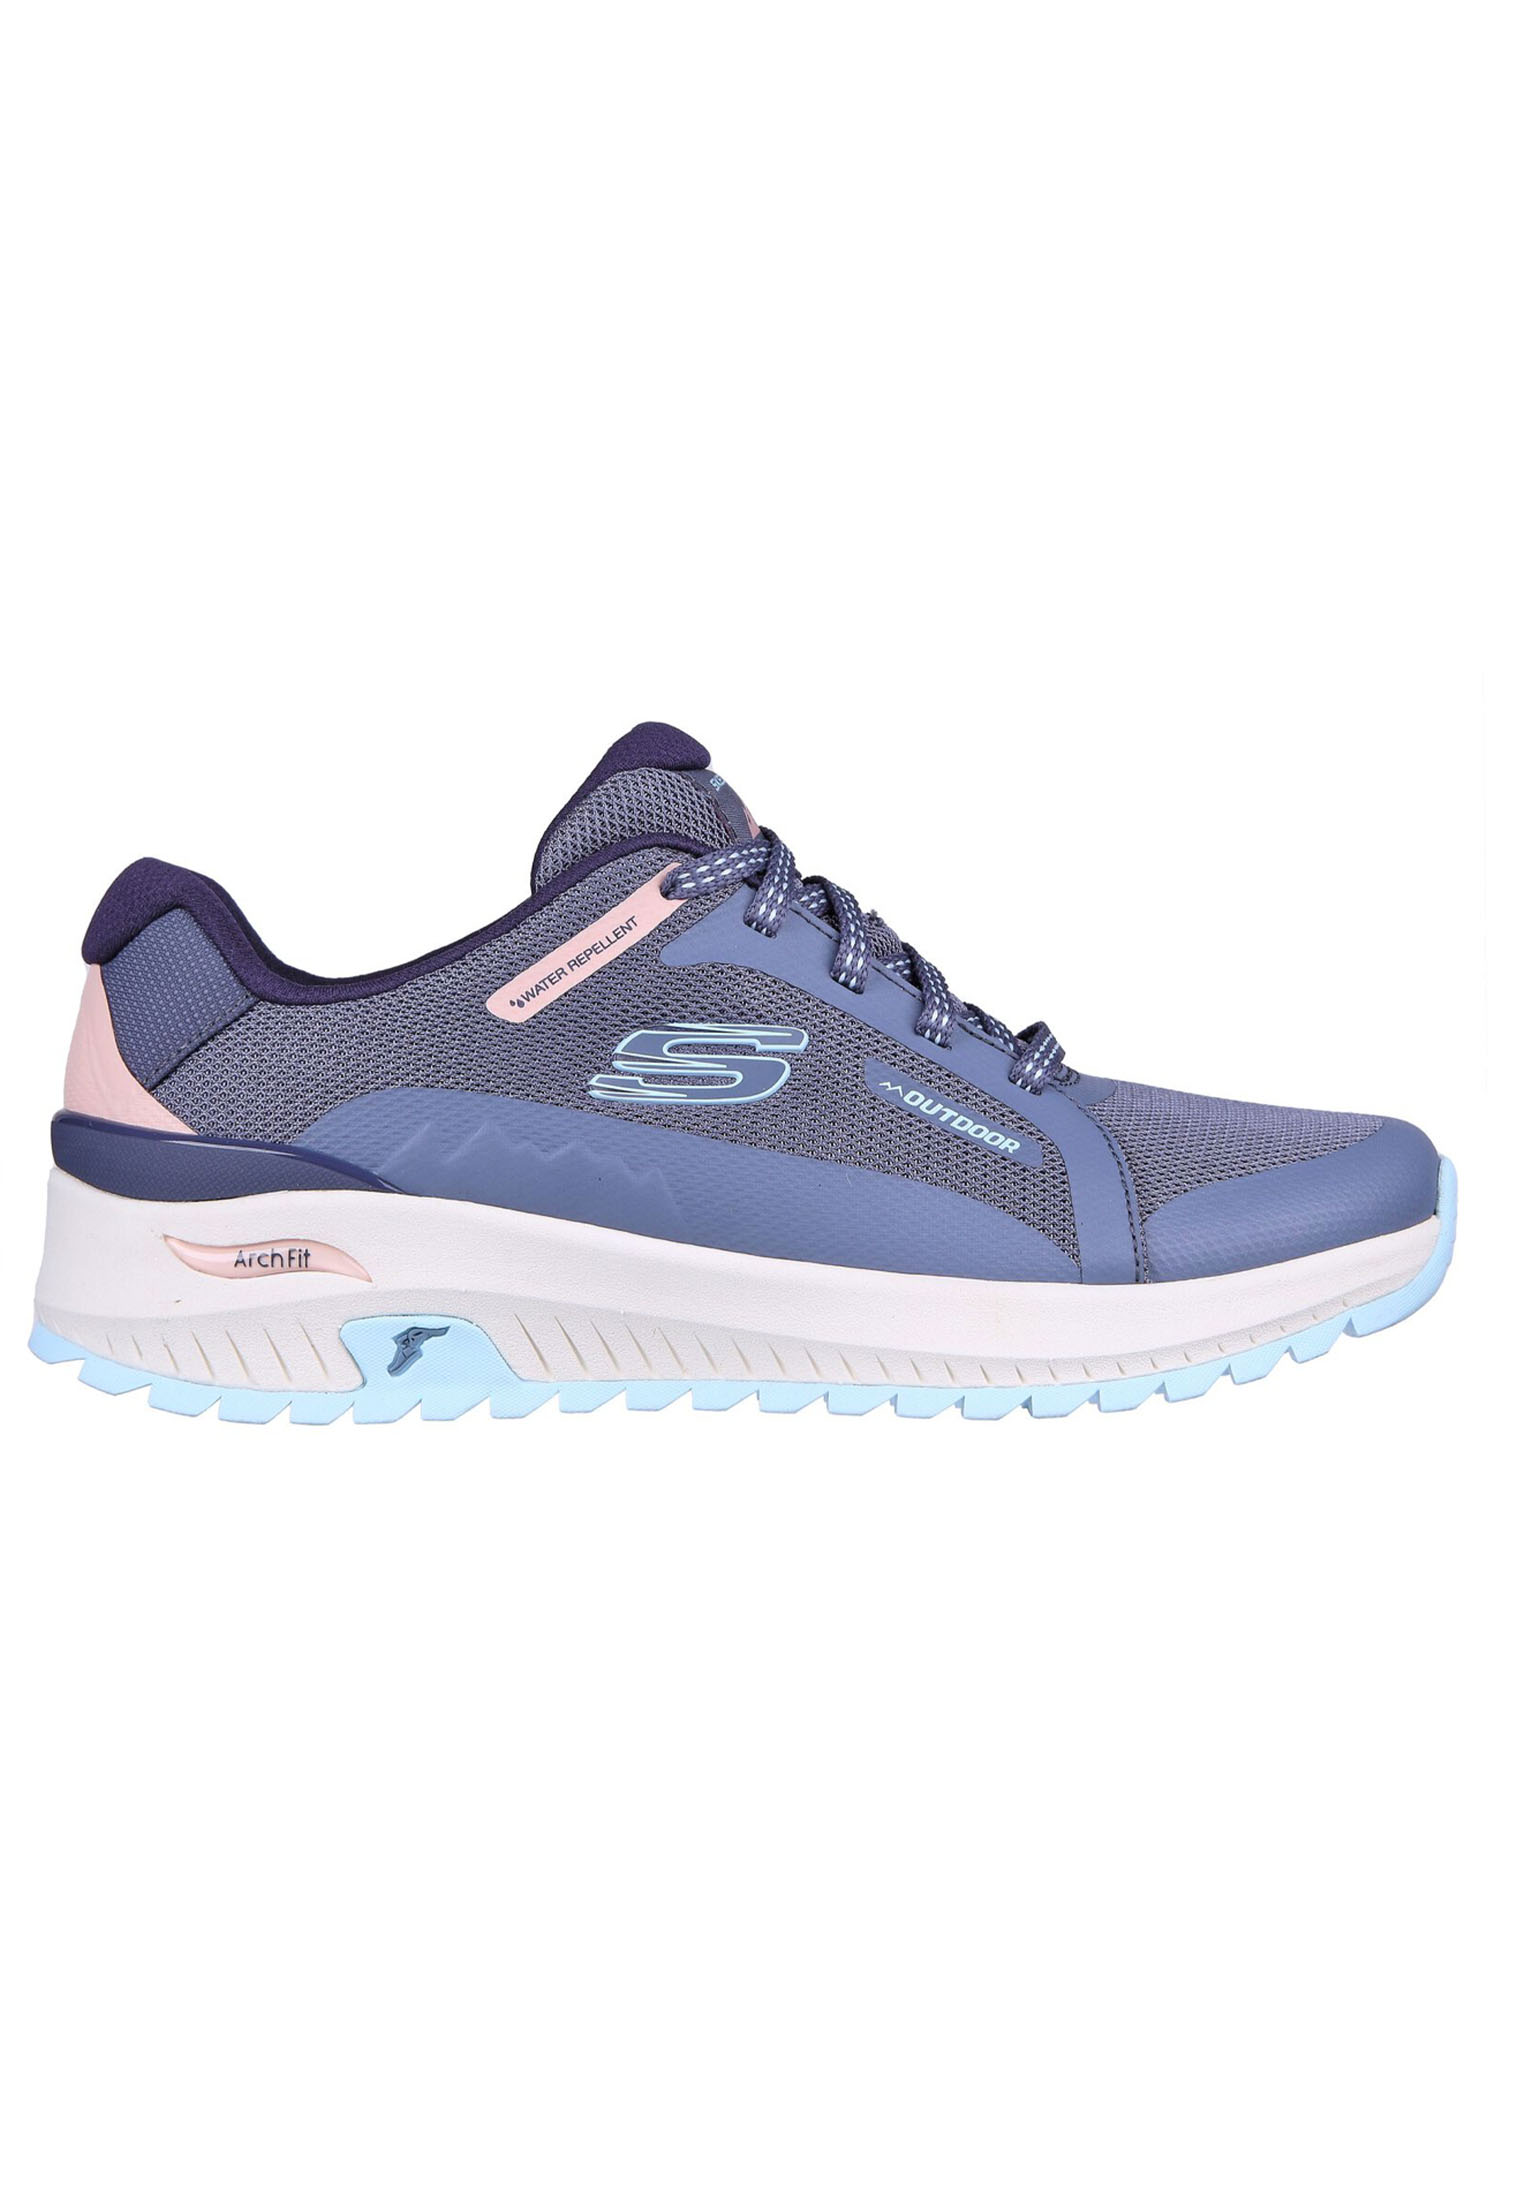 Skechers ARCH FIT DISCOVER dames sneakers - Blauw - Maat 41